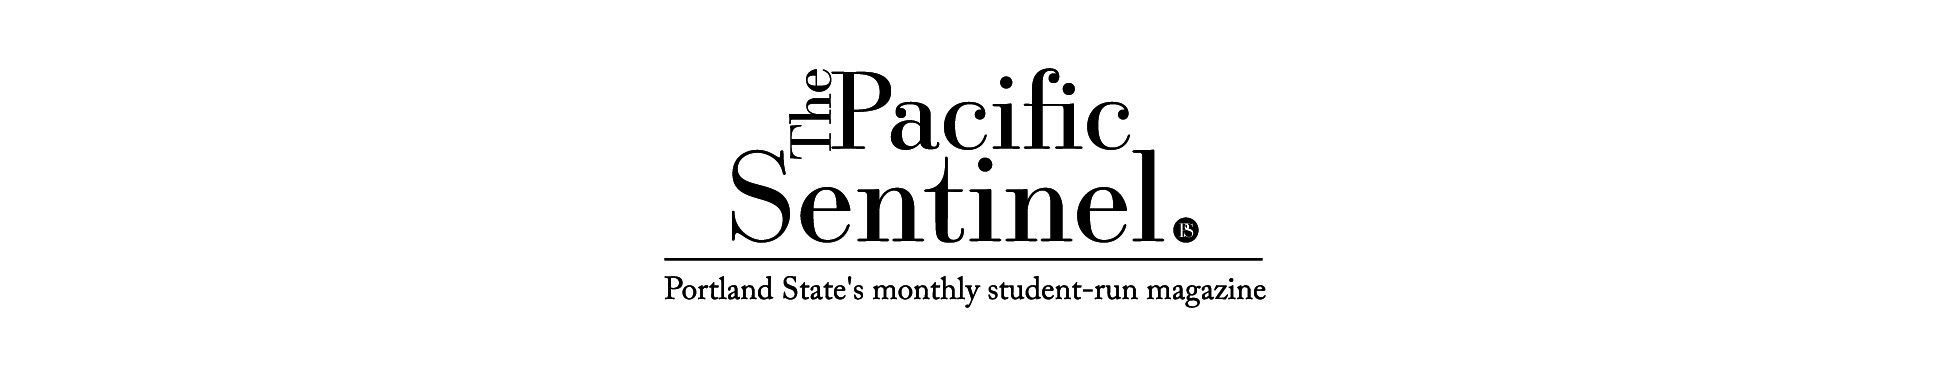 The Pacific Sentinel - Portland State's Student Run Monthly Magazine